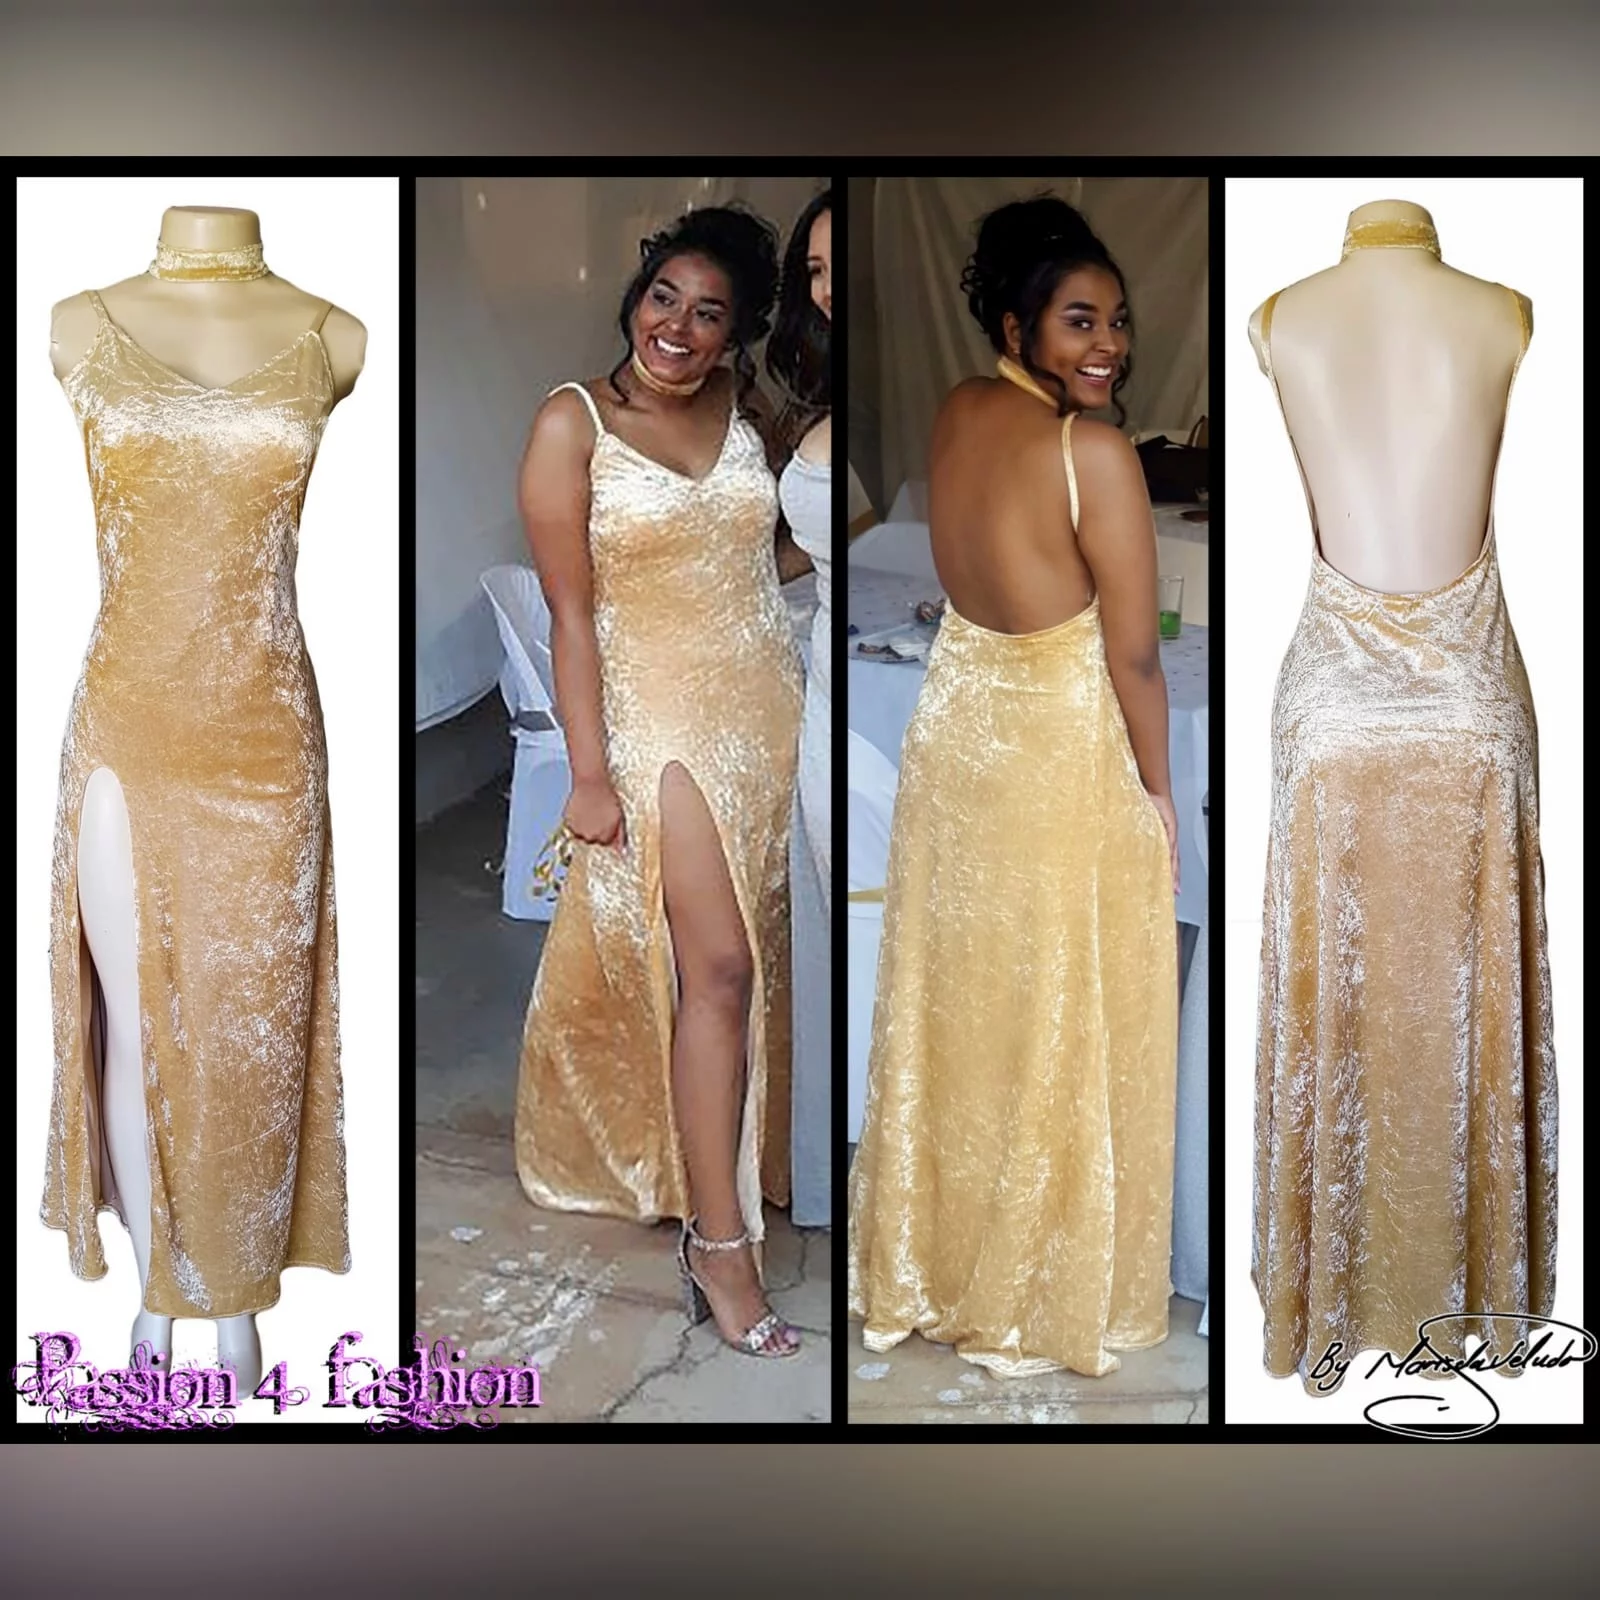 Champagne velvet long matric dance dress 3 champagne velvet long matric dance dress with a v neckline, rounded backless design with a high slit and a matching choker.